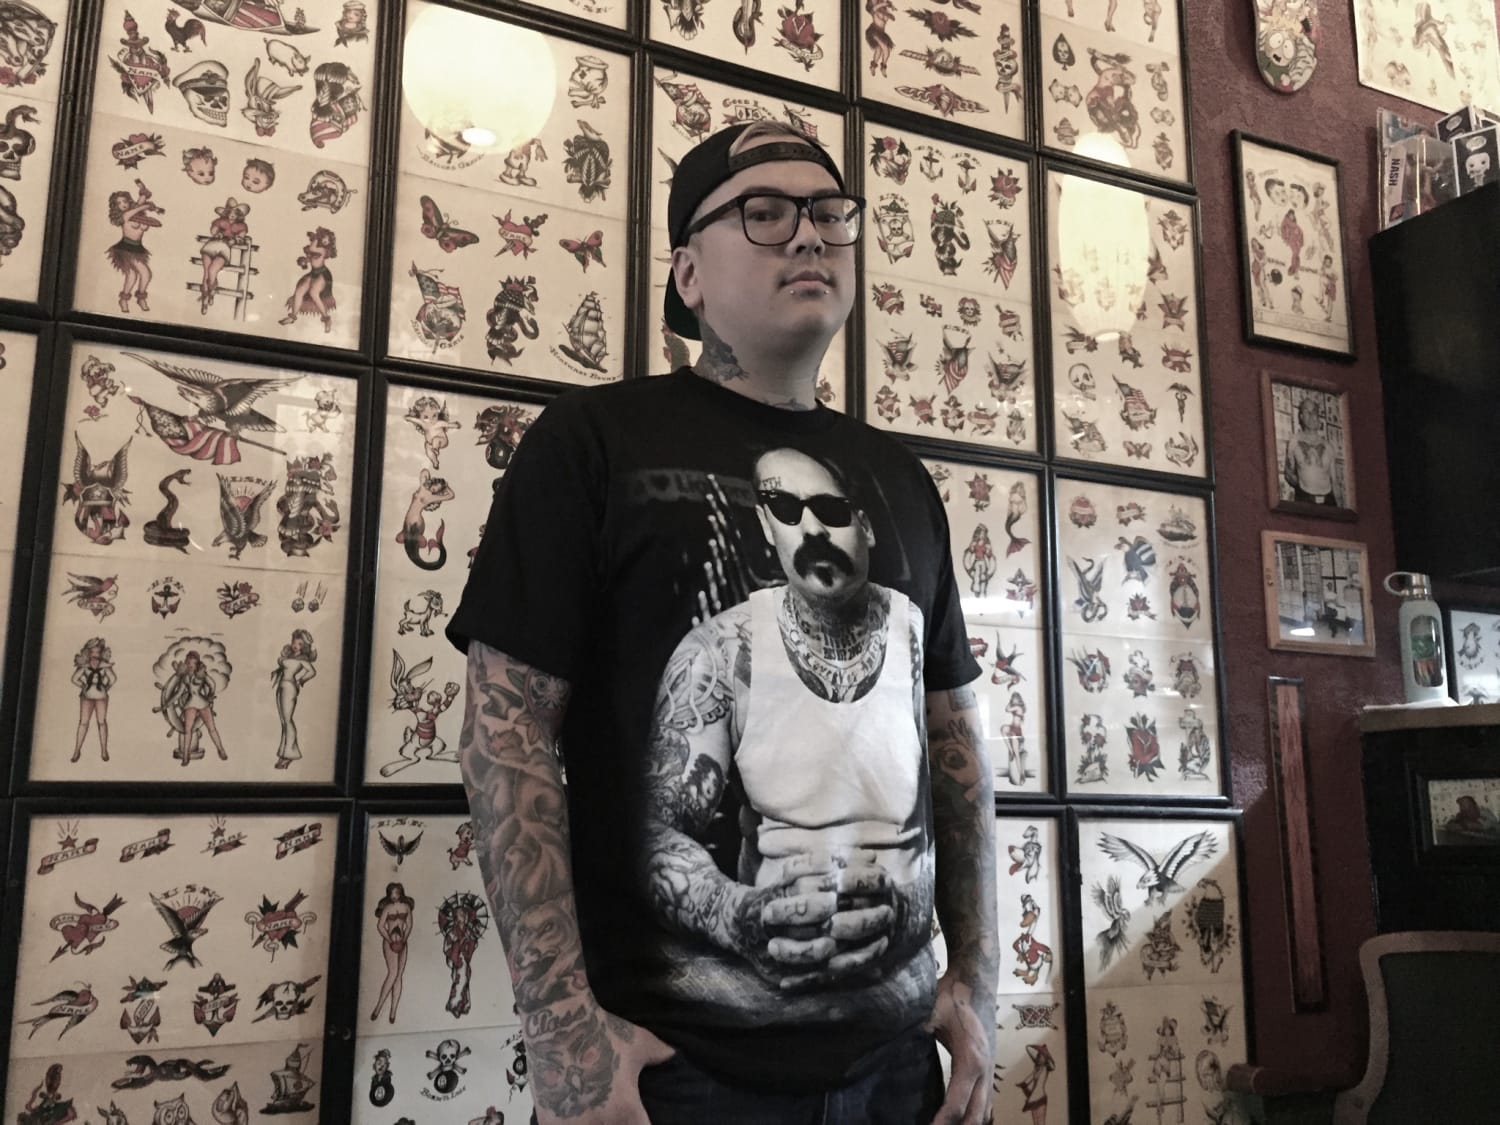 San Diego Tattooer Finds Success Blending Past and Present